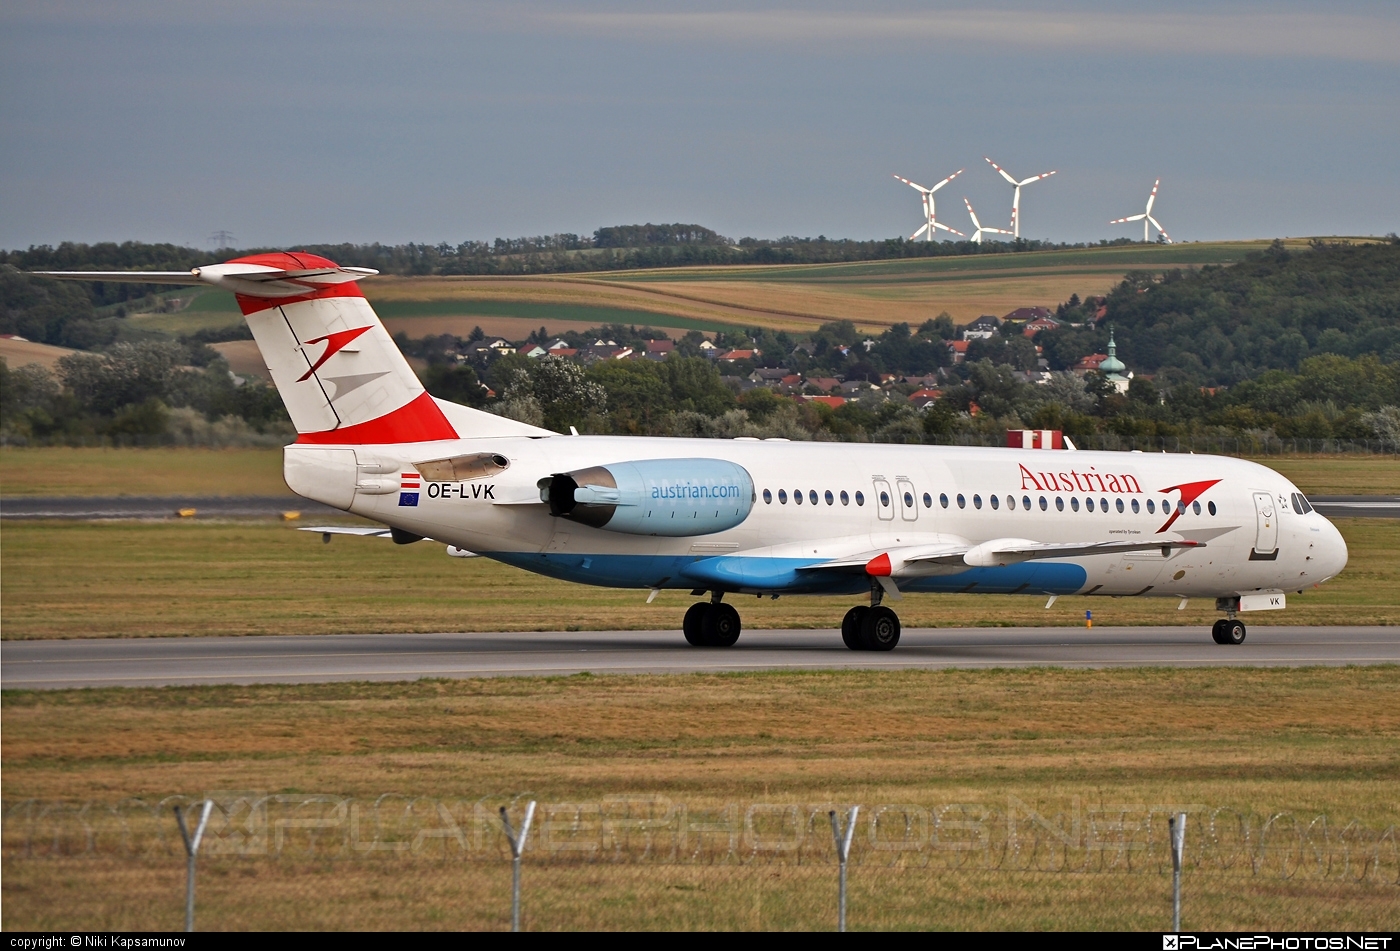 Fokker 100 - OE-LVK operated by Austrian Airlines #austrian #austrianAirlines #fokker #fokker100